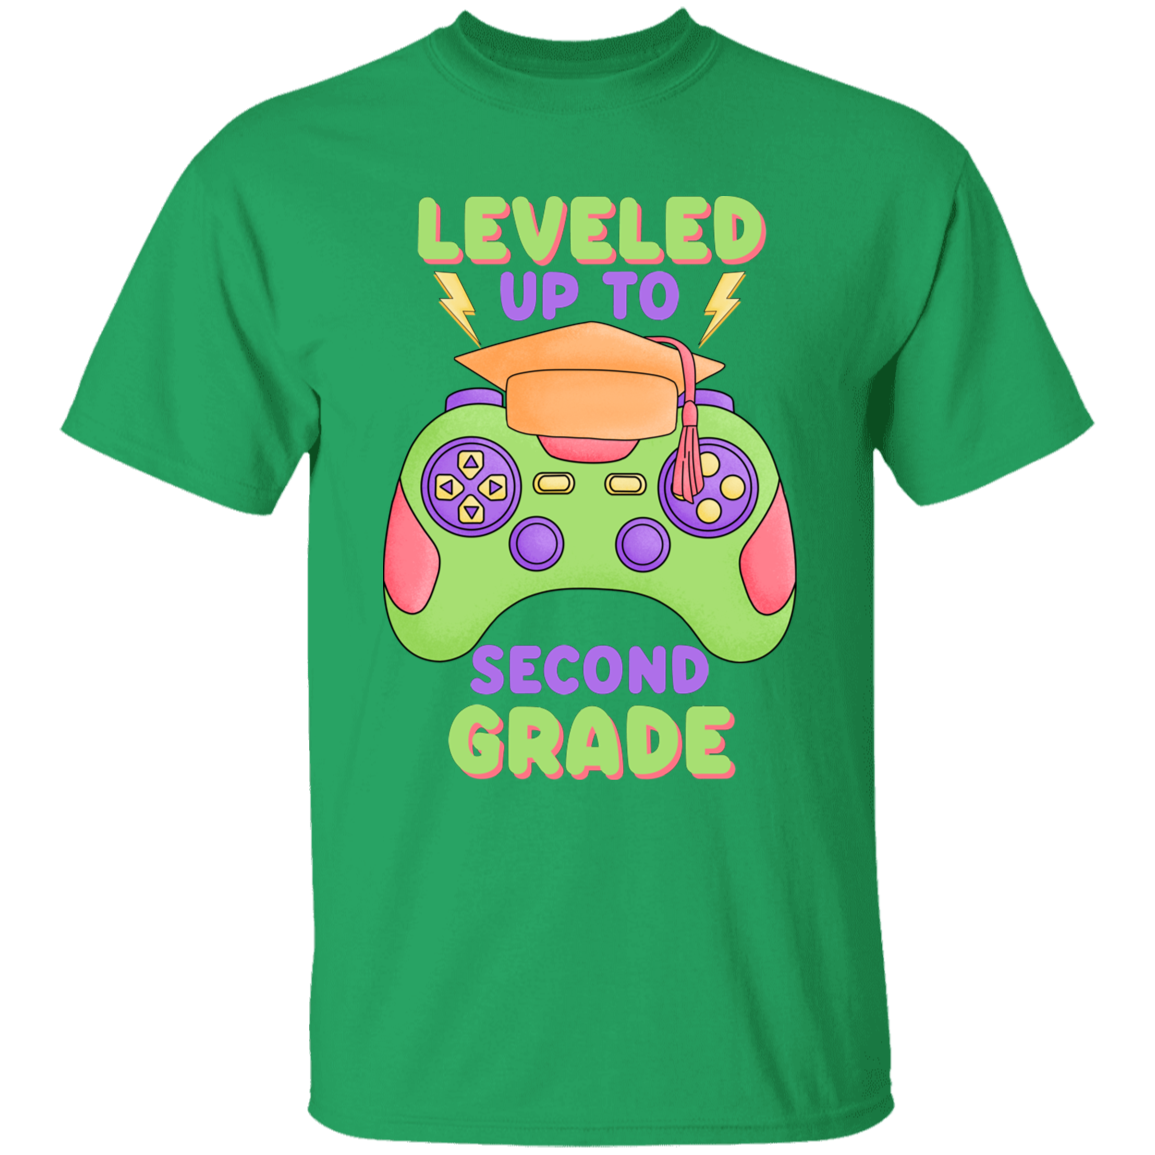 Level Up To Second Grade Youth Cotton T-Shirt